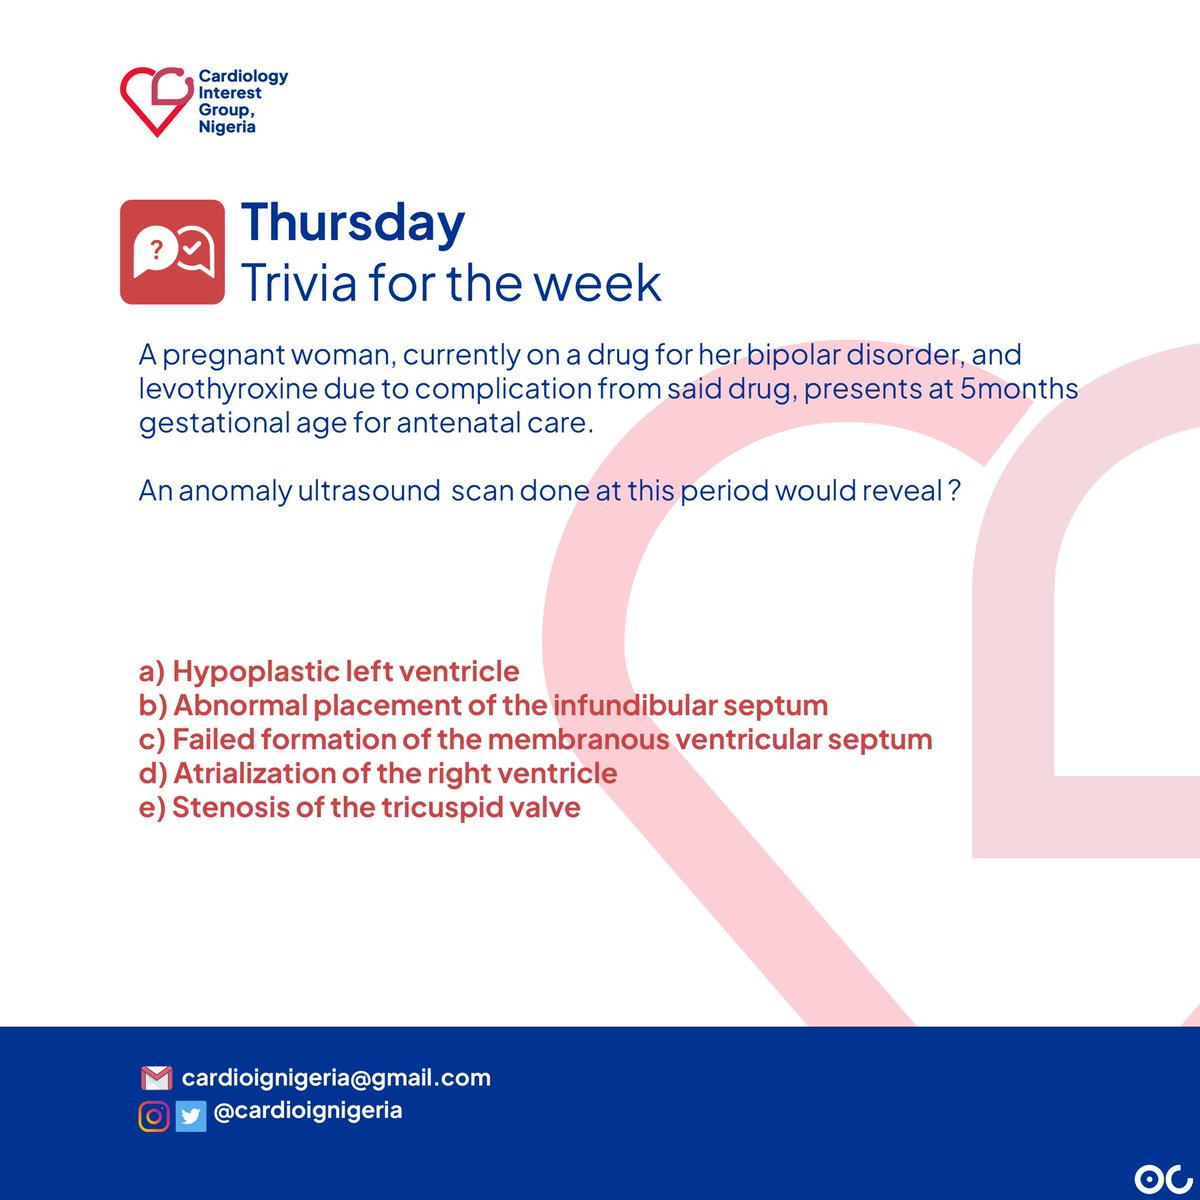 How good is your cardiology knowledge? 
Try out our 7th #CIGNThursdayTrivia 😊

Do you enjoy our Thursday Trivia? We look forward to your responses! Don’t forget to tag a medical student or doctor to try this 👍